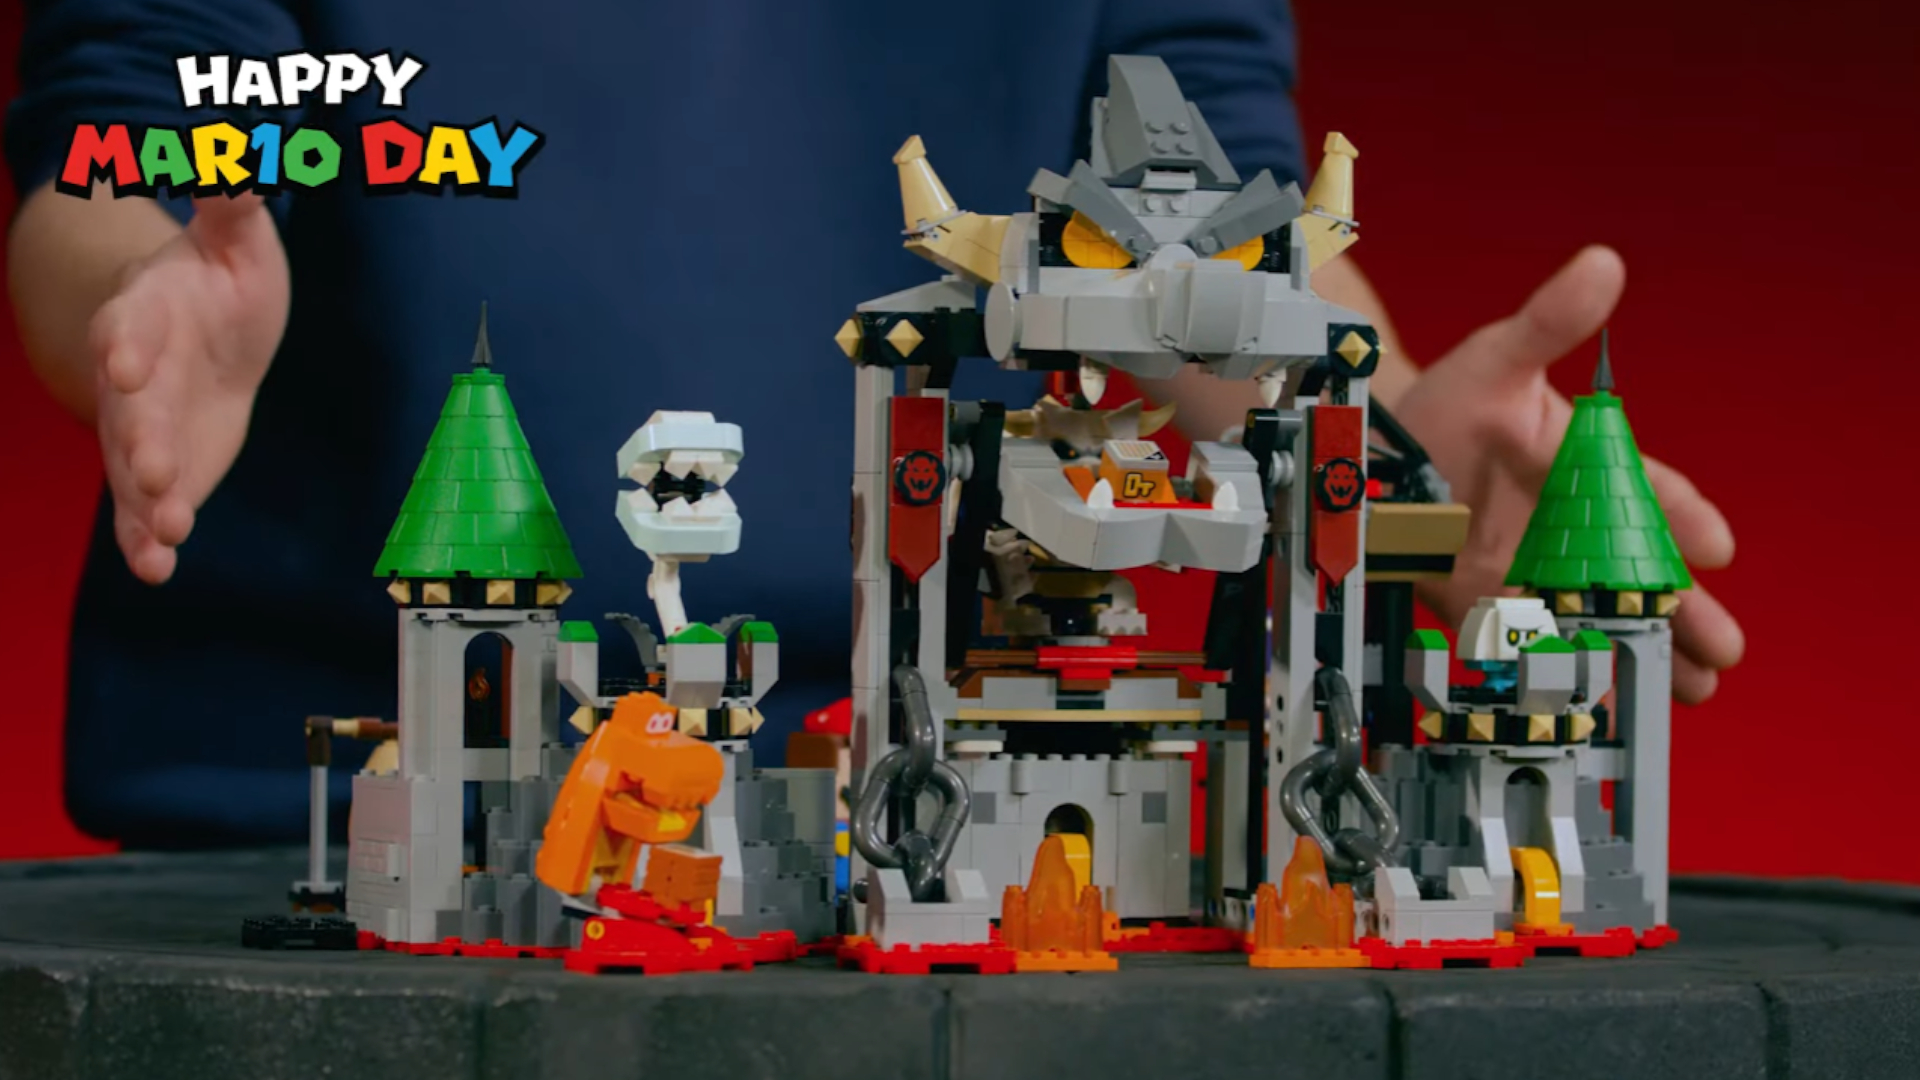 A fully-constructed Lego Dry Bowser Castle Battle set